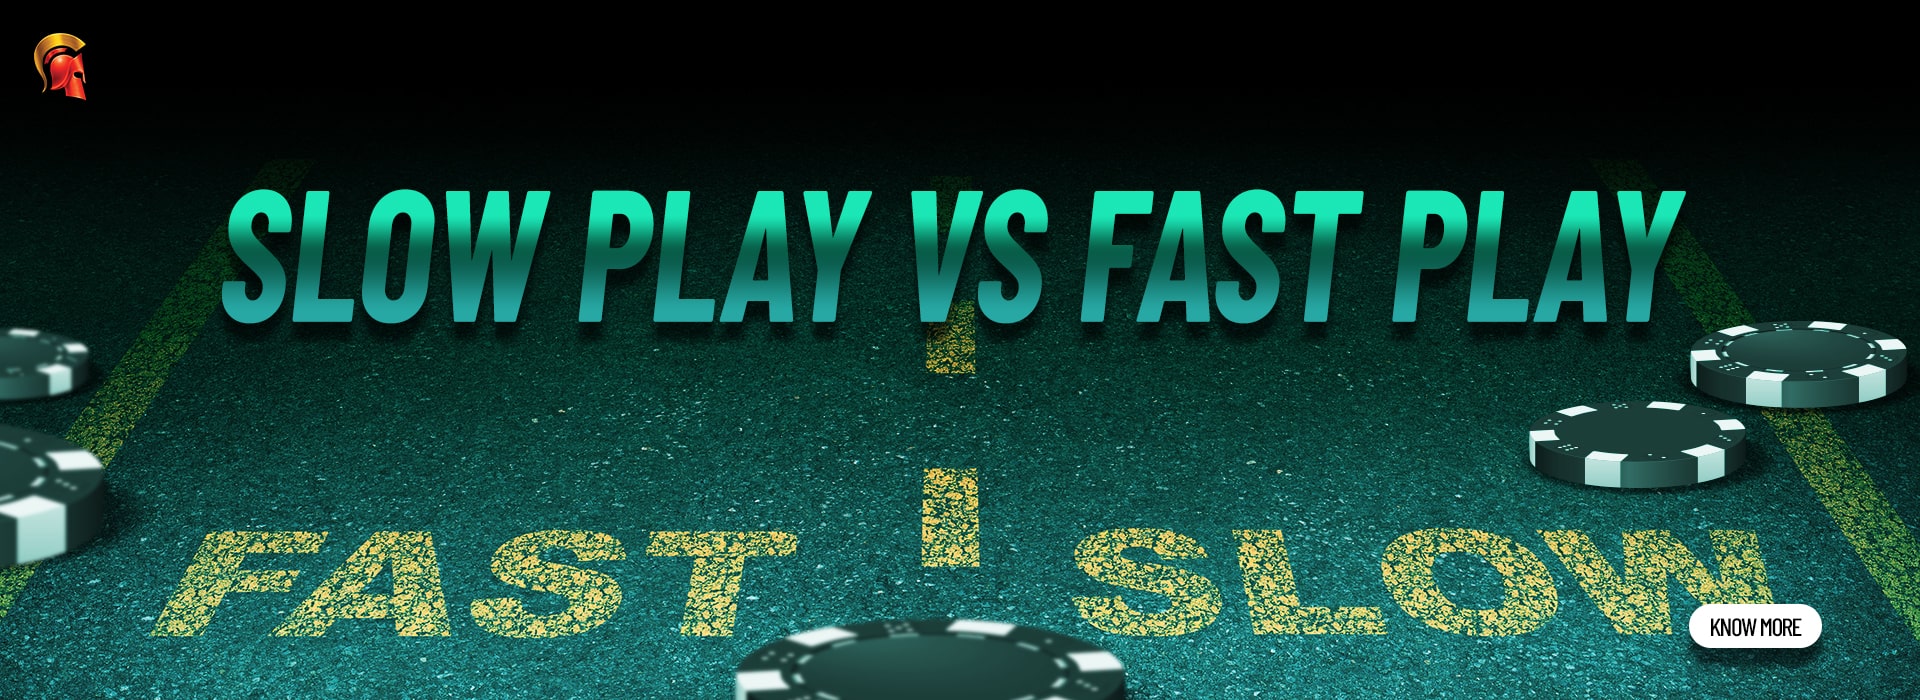 Slow Play vs Fast Play